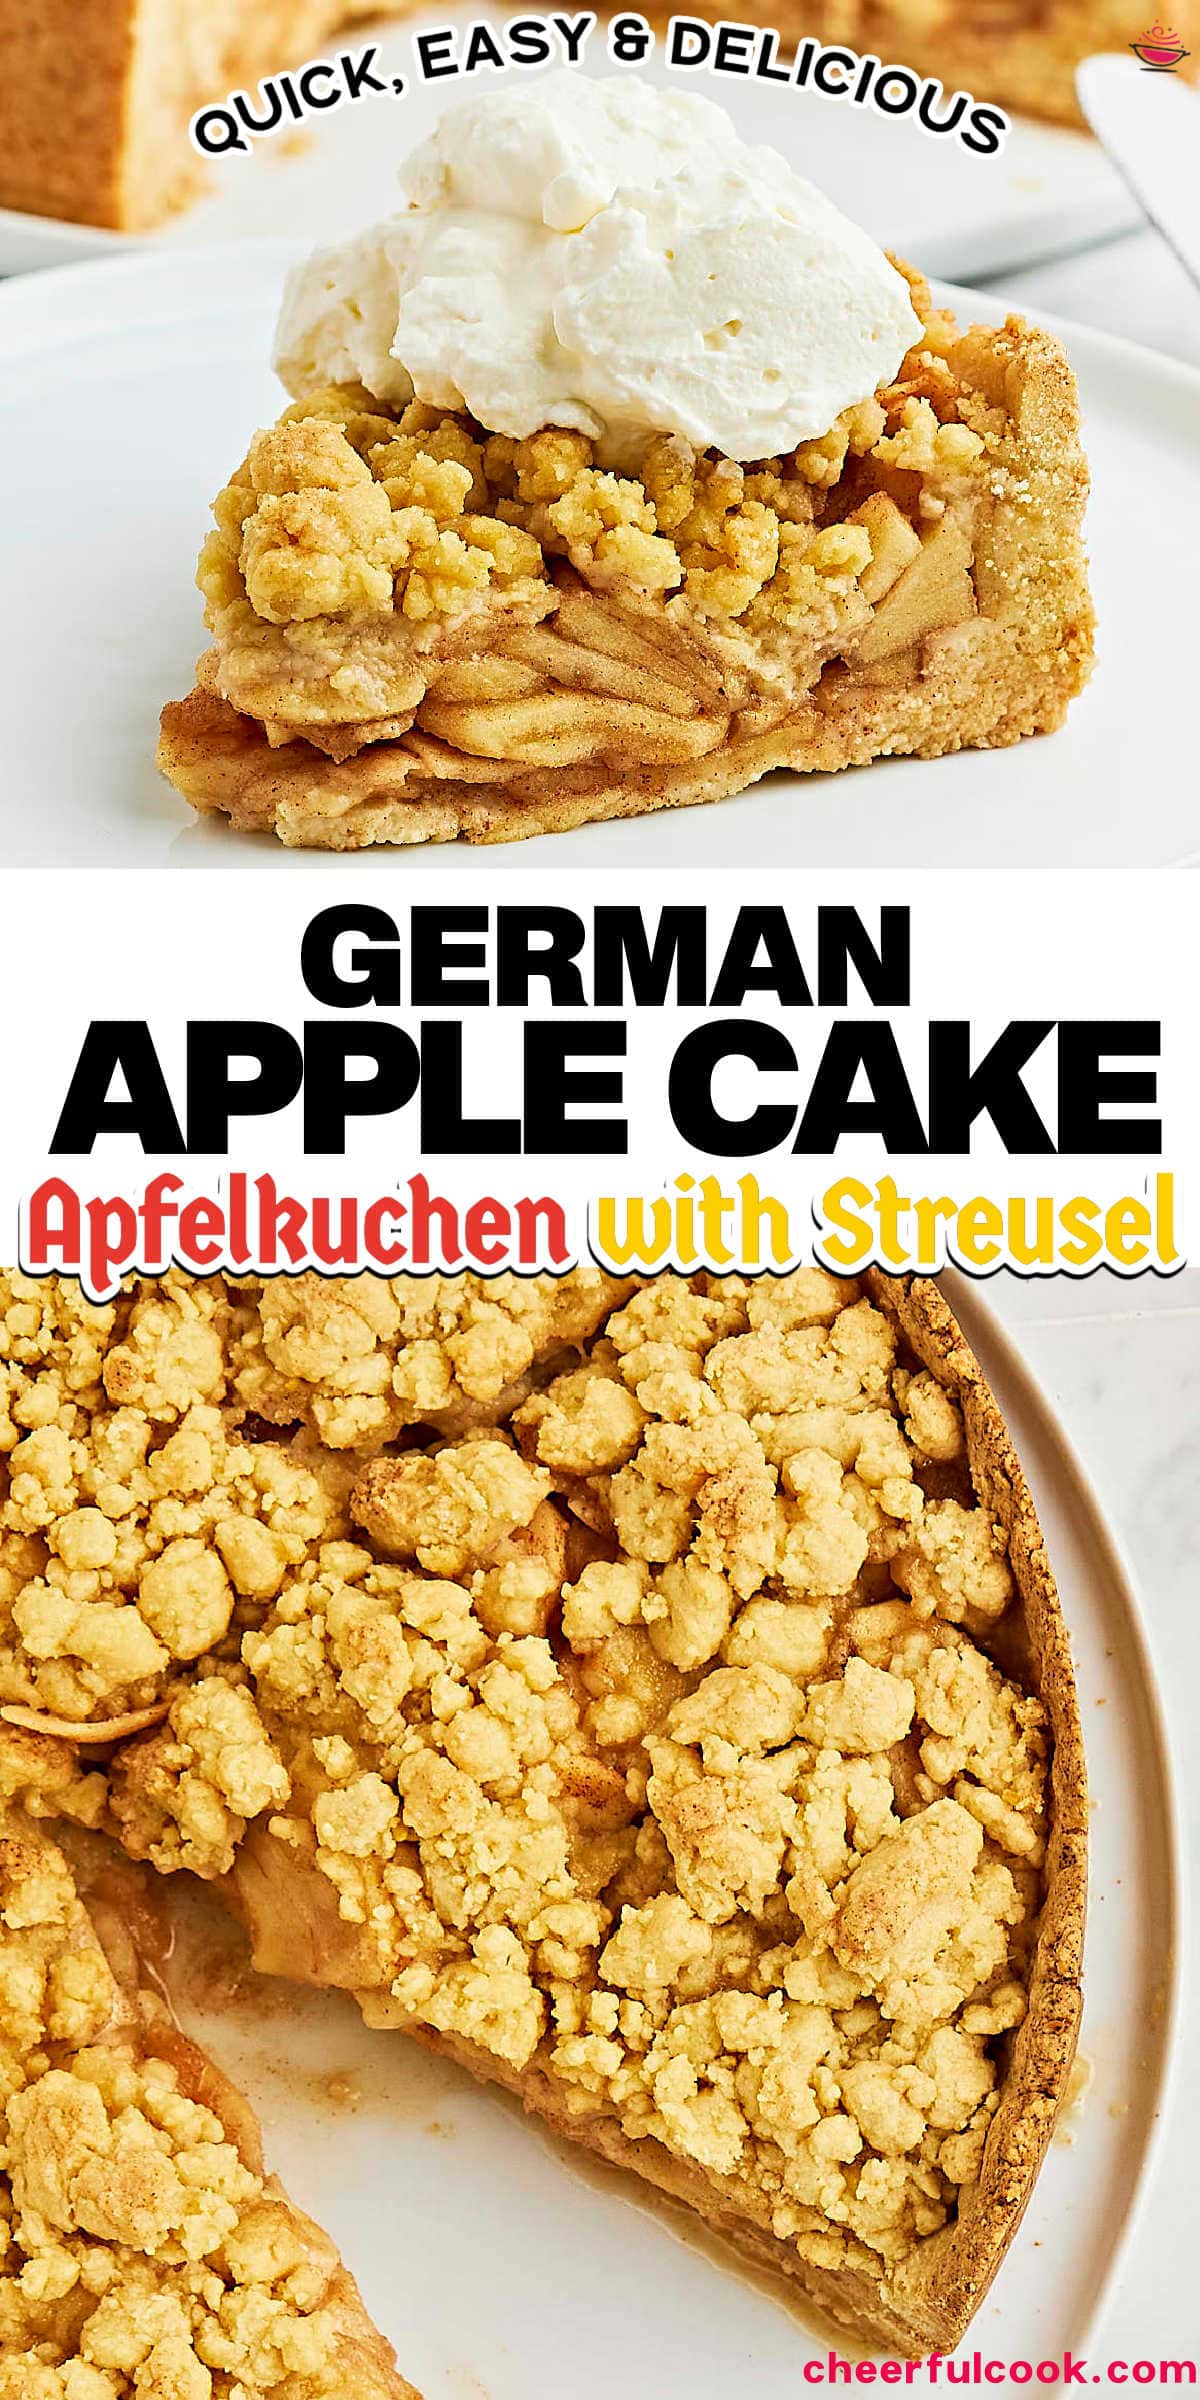 This German Apple Cake (Apfelkuchen) with Streusel Topping is a sweet treat you can easily make at home. It's packed with apples and a dash of vanilla! #cheerfulcook #applecake #apfelkuchen #germanrecipes #easybaking #homebaked #dessertrecipe via @cheerfulcook